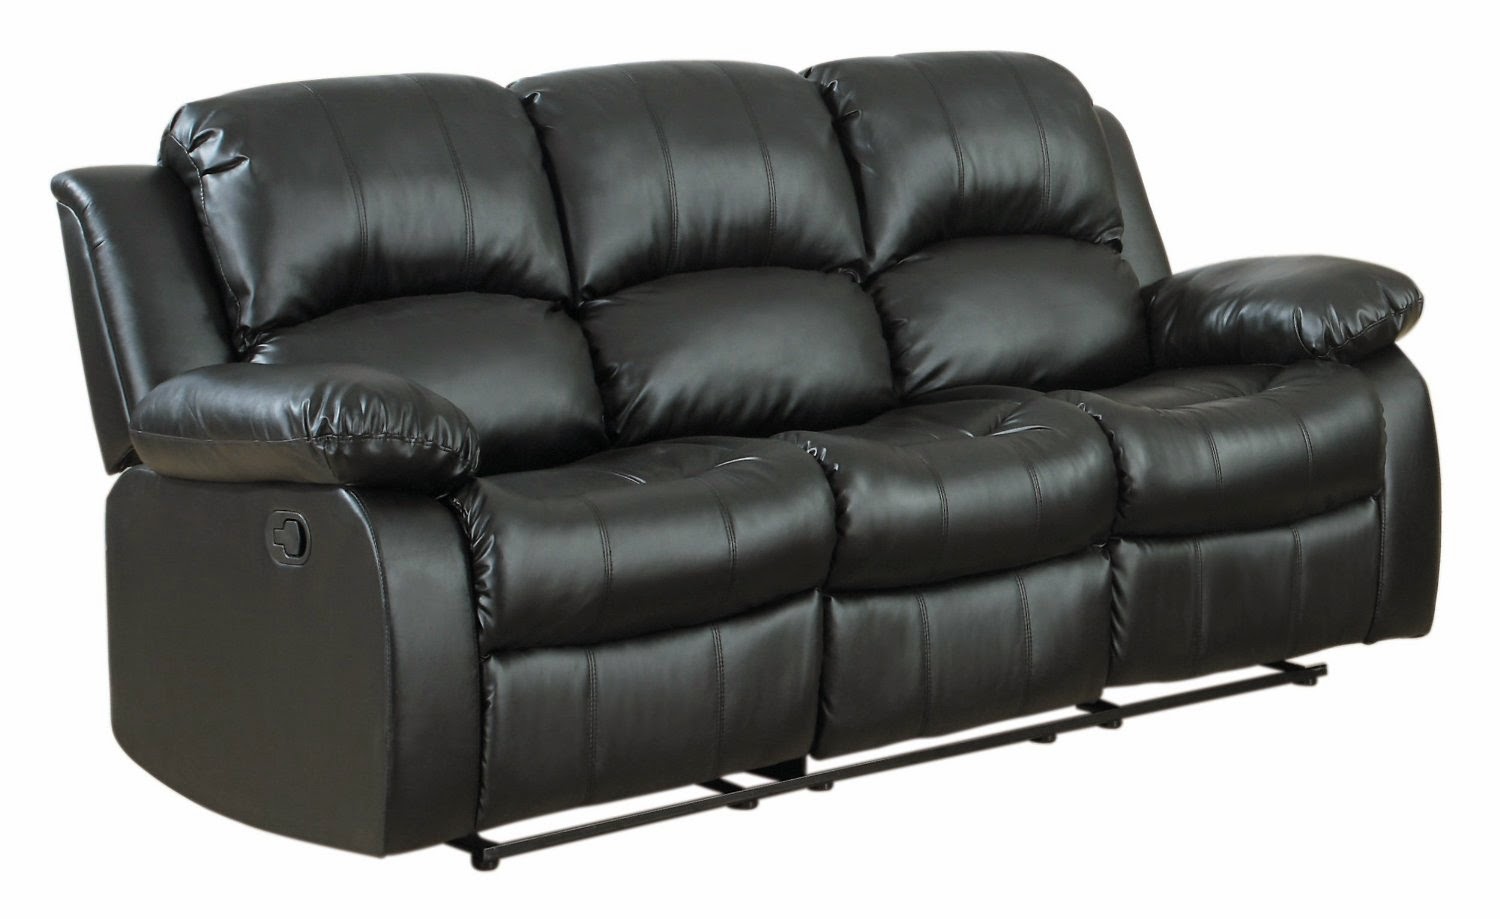 black faux leather reclining sofa